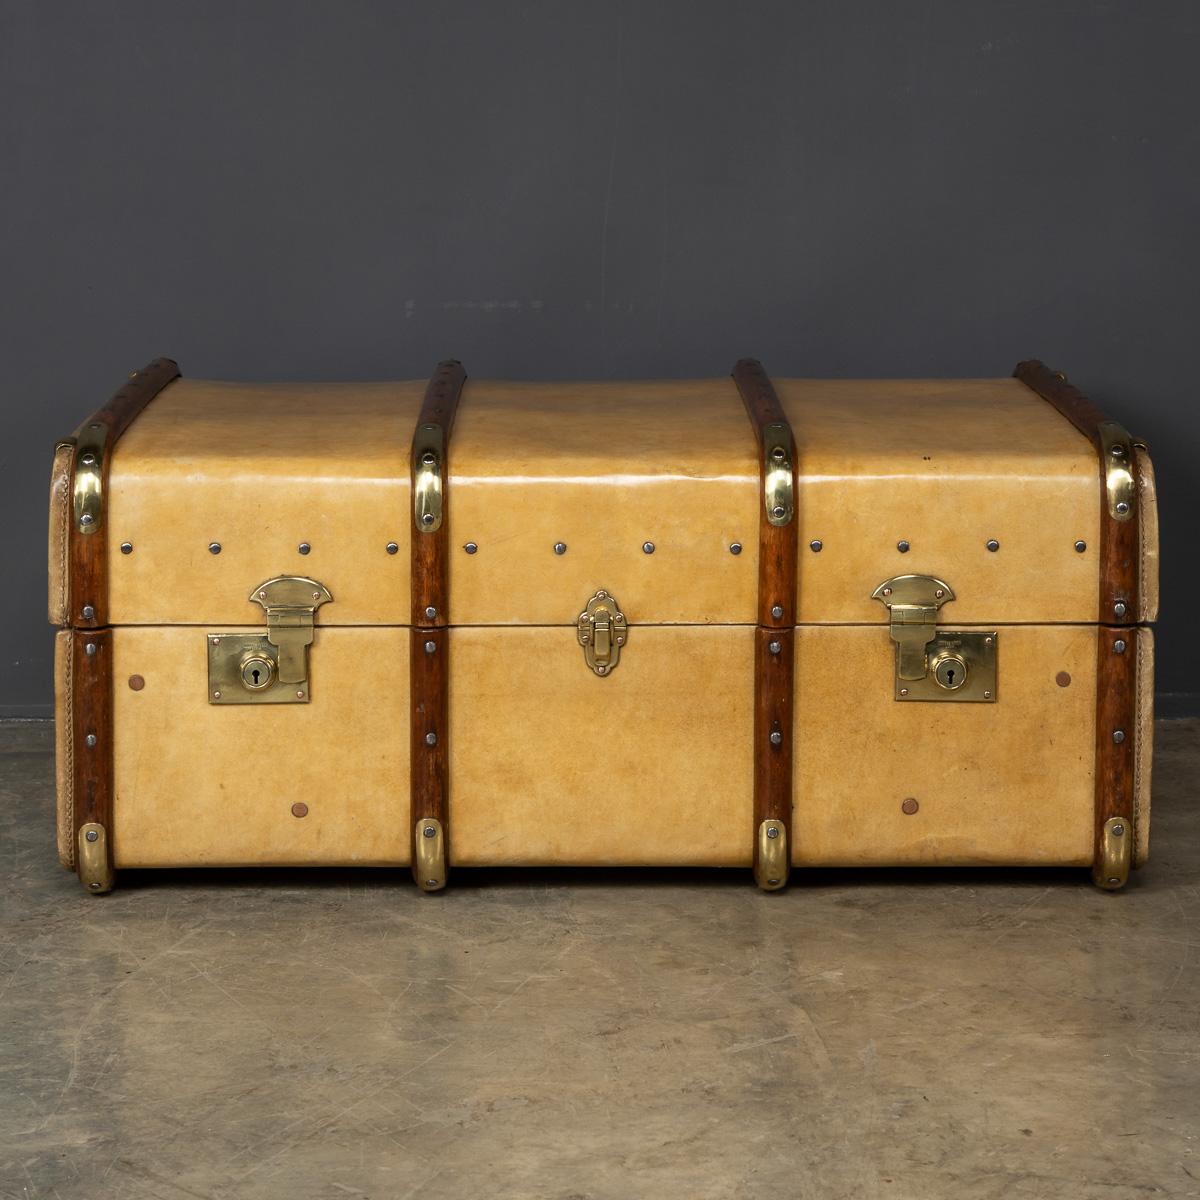 Antique early-20th Century Asprey trunk, made around the 1910's, from cow hide and bound with wood, has it's original brass fittings and leather handles.

Condition
In Great Condition - wear as expected, overall good vintage